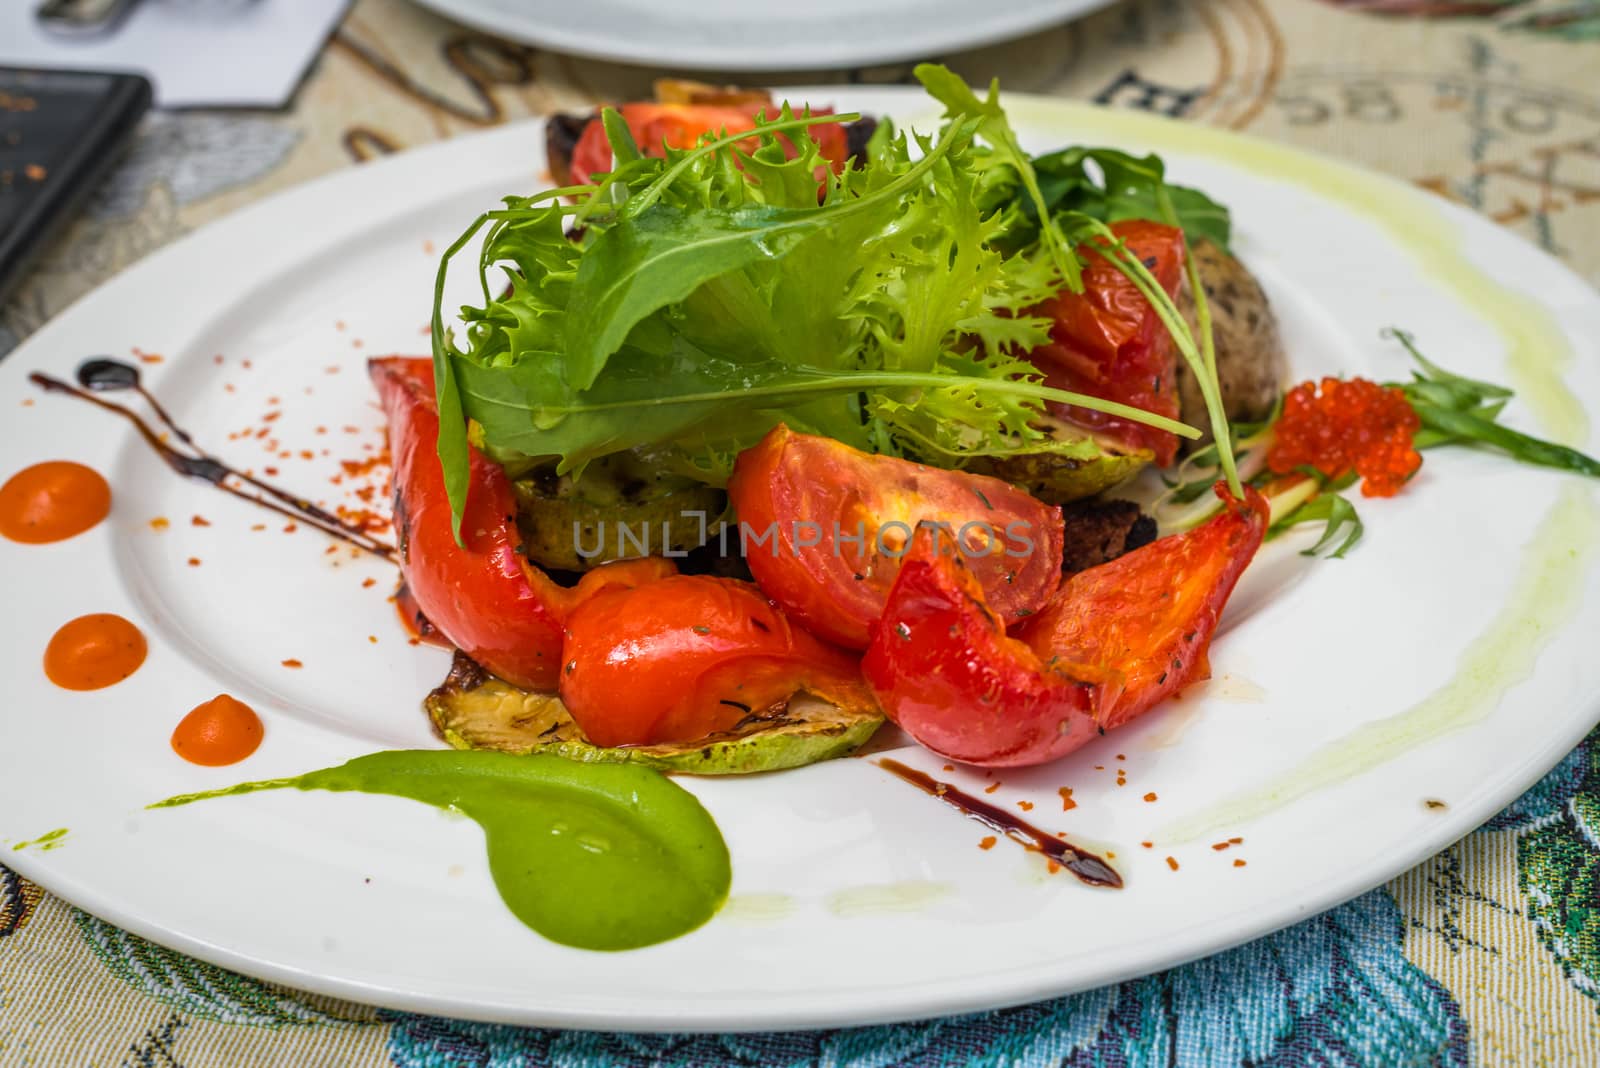 Baked tomatoes and peppers with Greens by okskukuruza